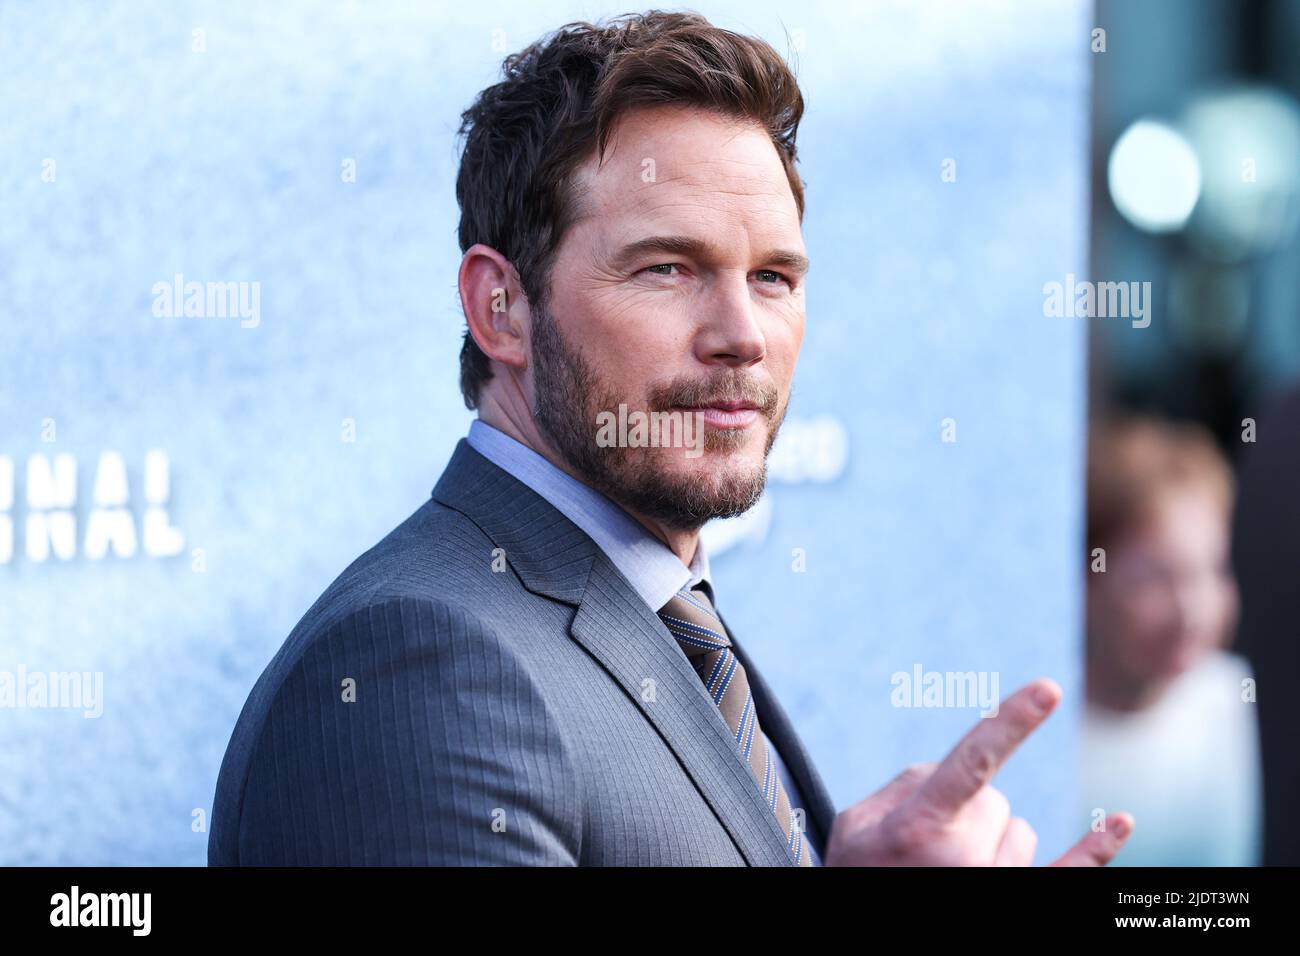 LOS ANGELES, CALIFORNIA, USA - JUNE 22: American actor Chris Pratt arrives at the Los Angeles Premiere Of Amazon Prime Video's 'The Terminal List' Season 1 held at the Directors Guild of America Theater Complex on June 22, 2022 in Los Angeles, California, United States. (Photo by Xavier Collin/Image Press Agency) Stock Photo